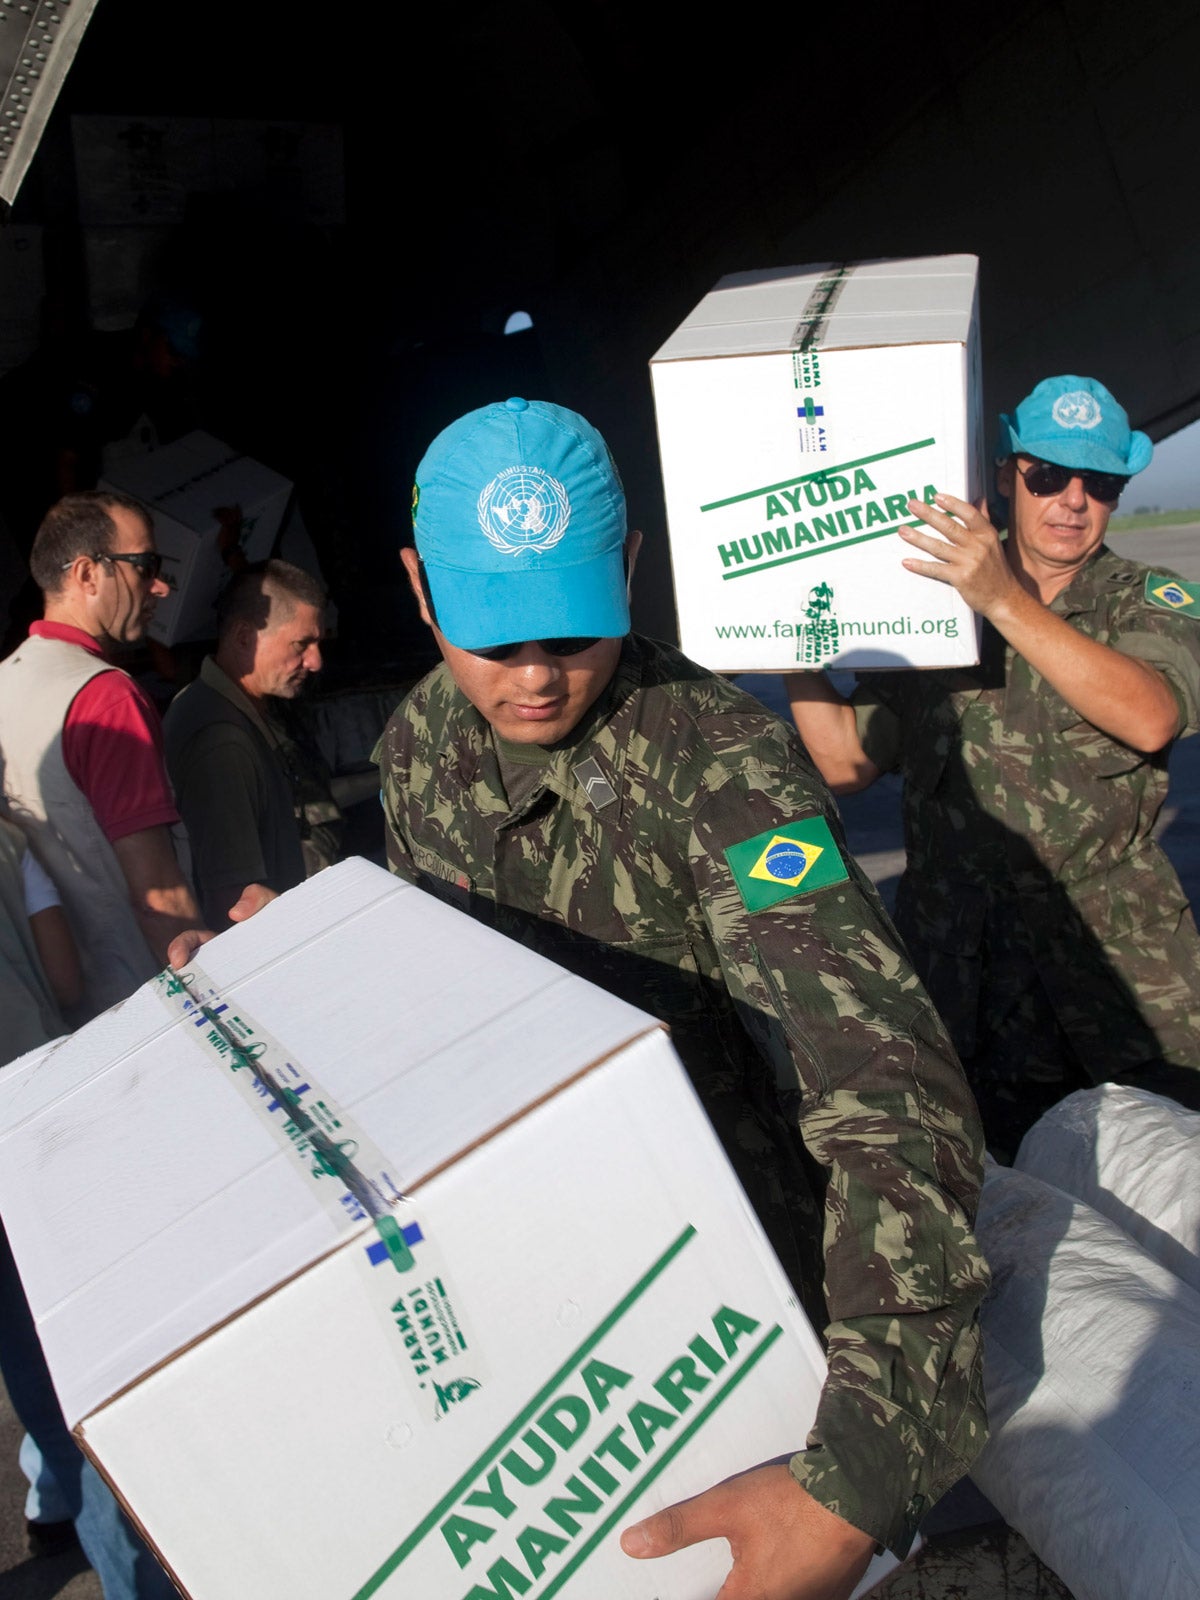 An aid officer, wearing camouflage with a Brazilian flag path and a blue WHO baseball cap, carries a white box with the words “Ayuda Humanitarian” written in green. Another man carries one behind him. They are on a tarmac and are carrying the boxes around a landed plane. Other aid workers are in the background.